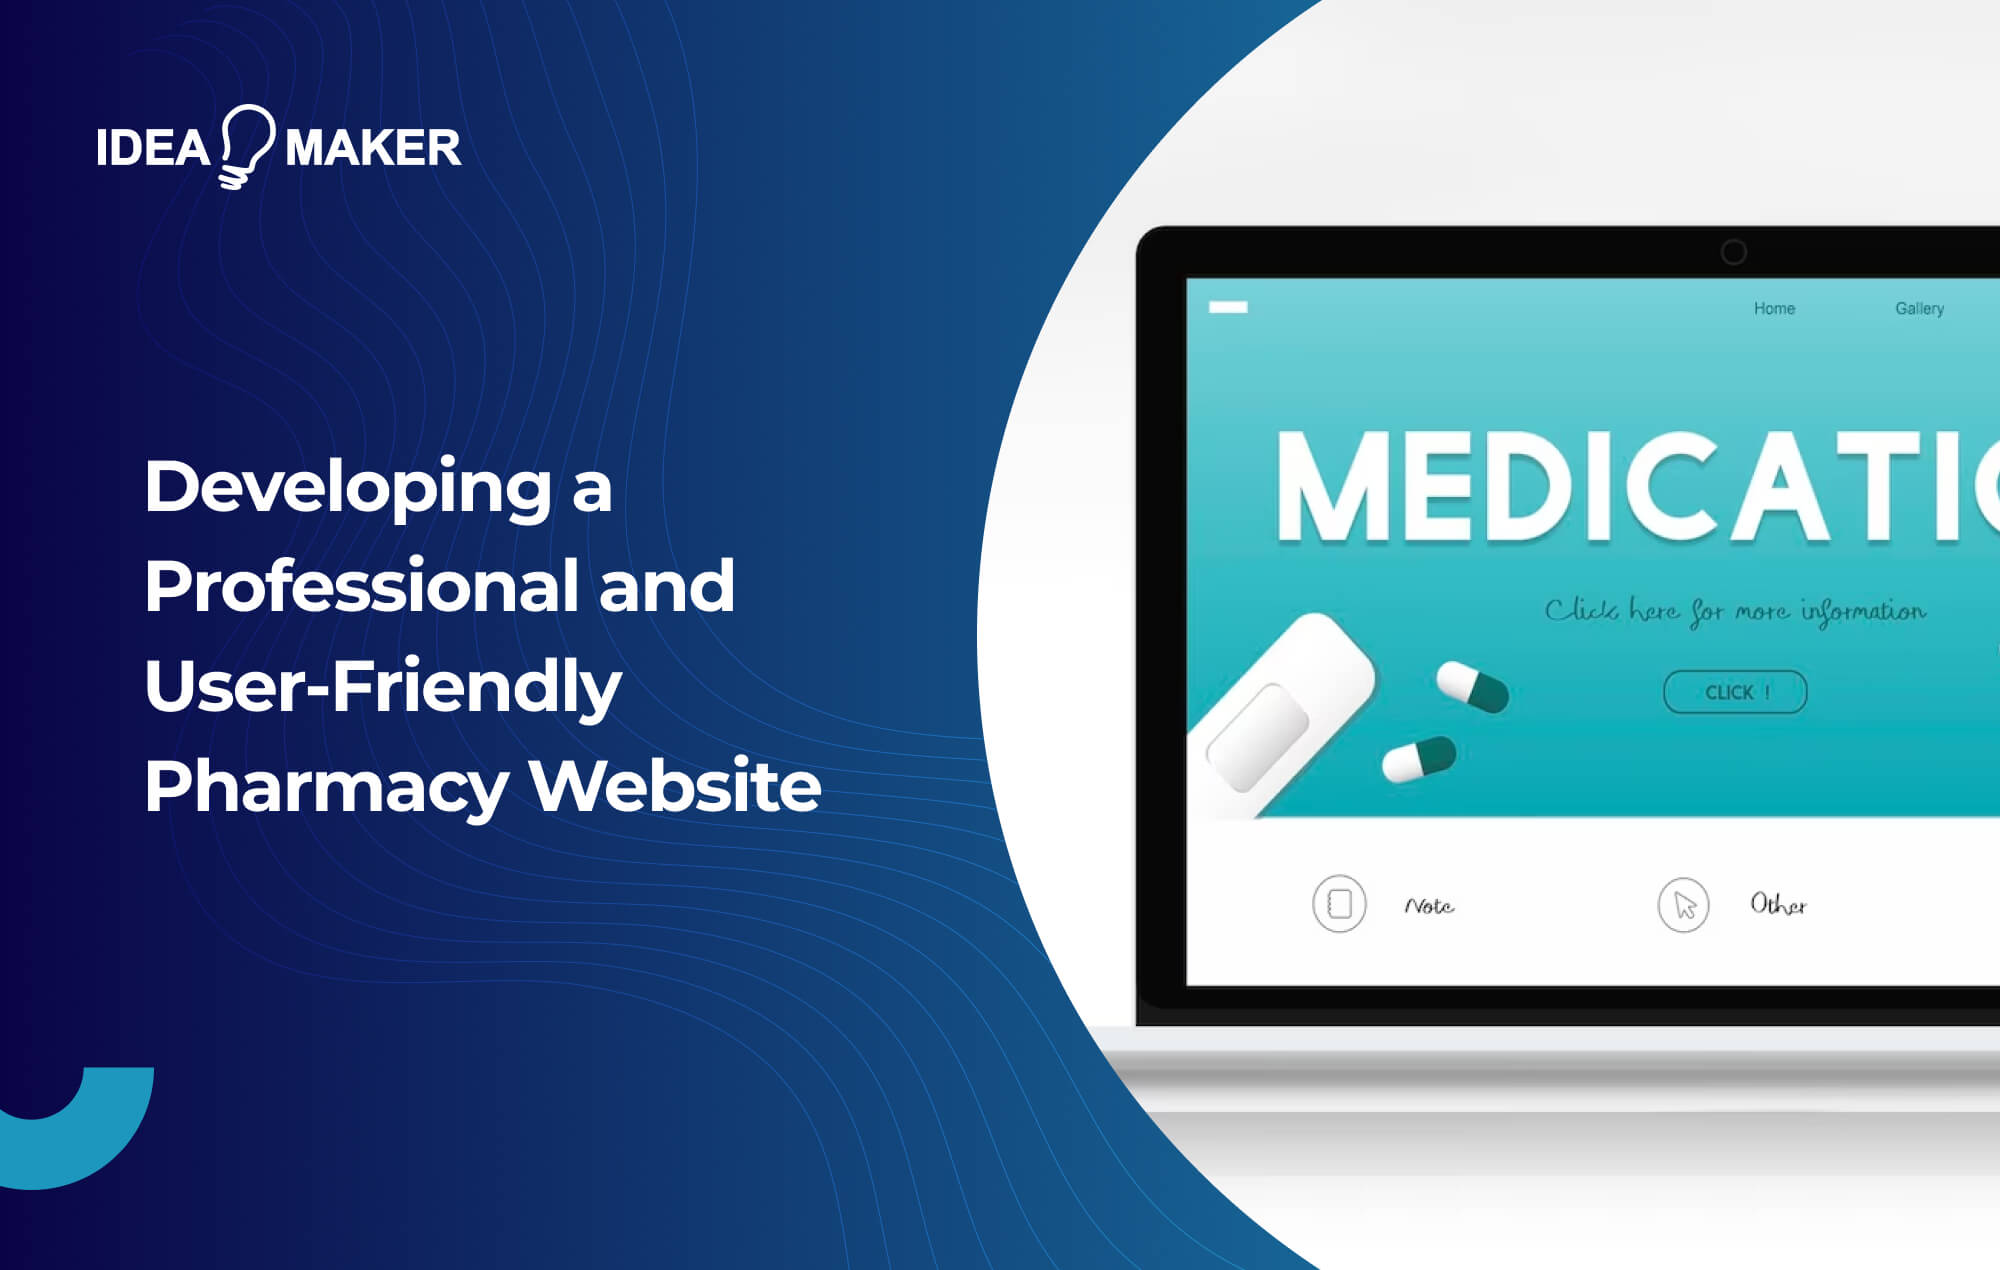 Developing a Professional and User-Friendly Pharmacy Website